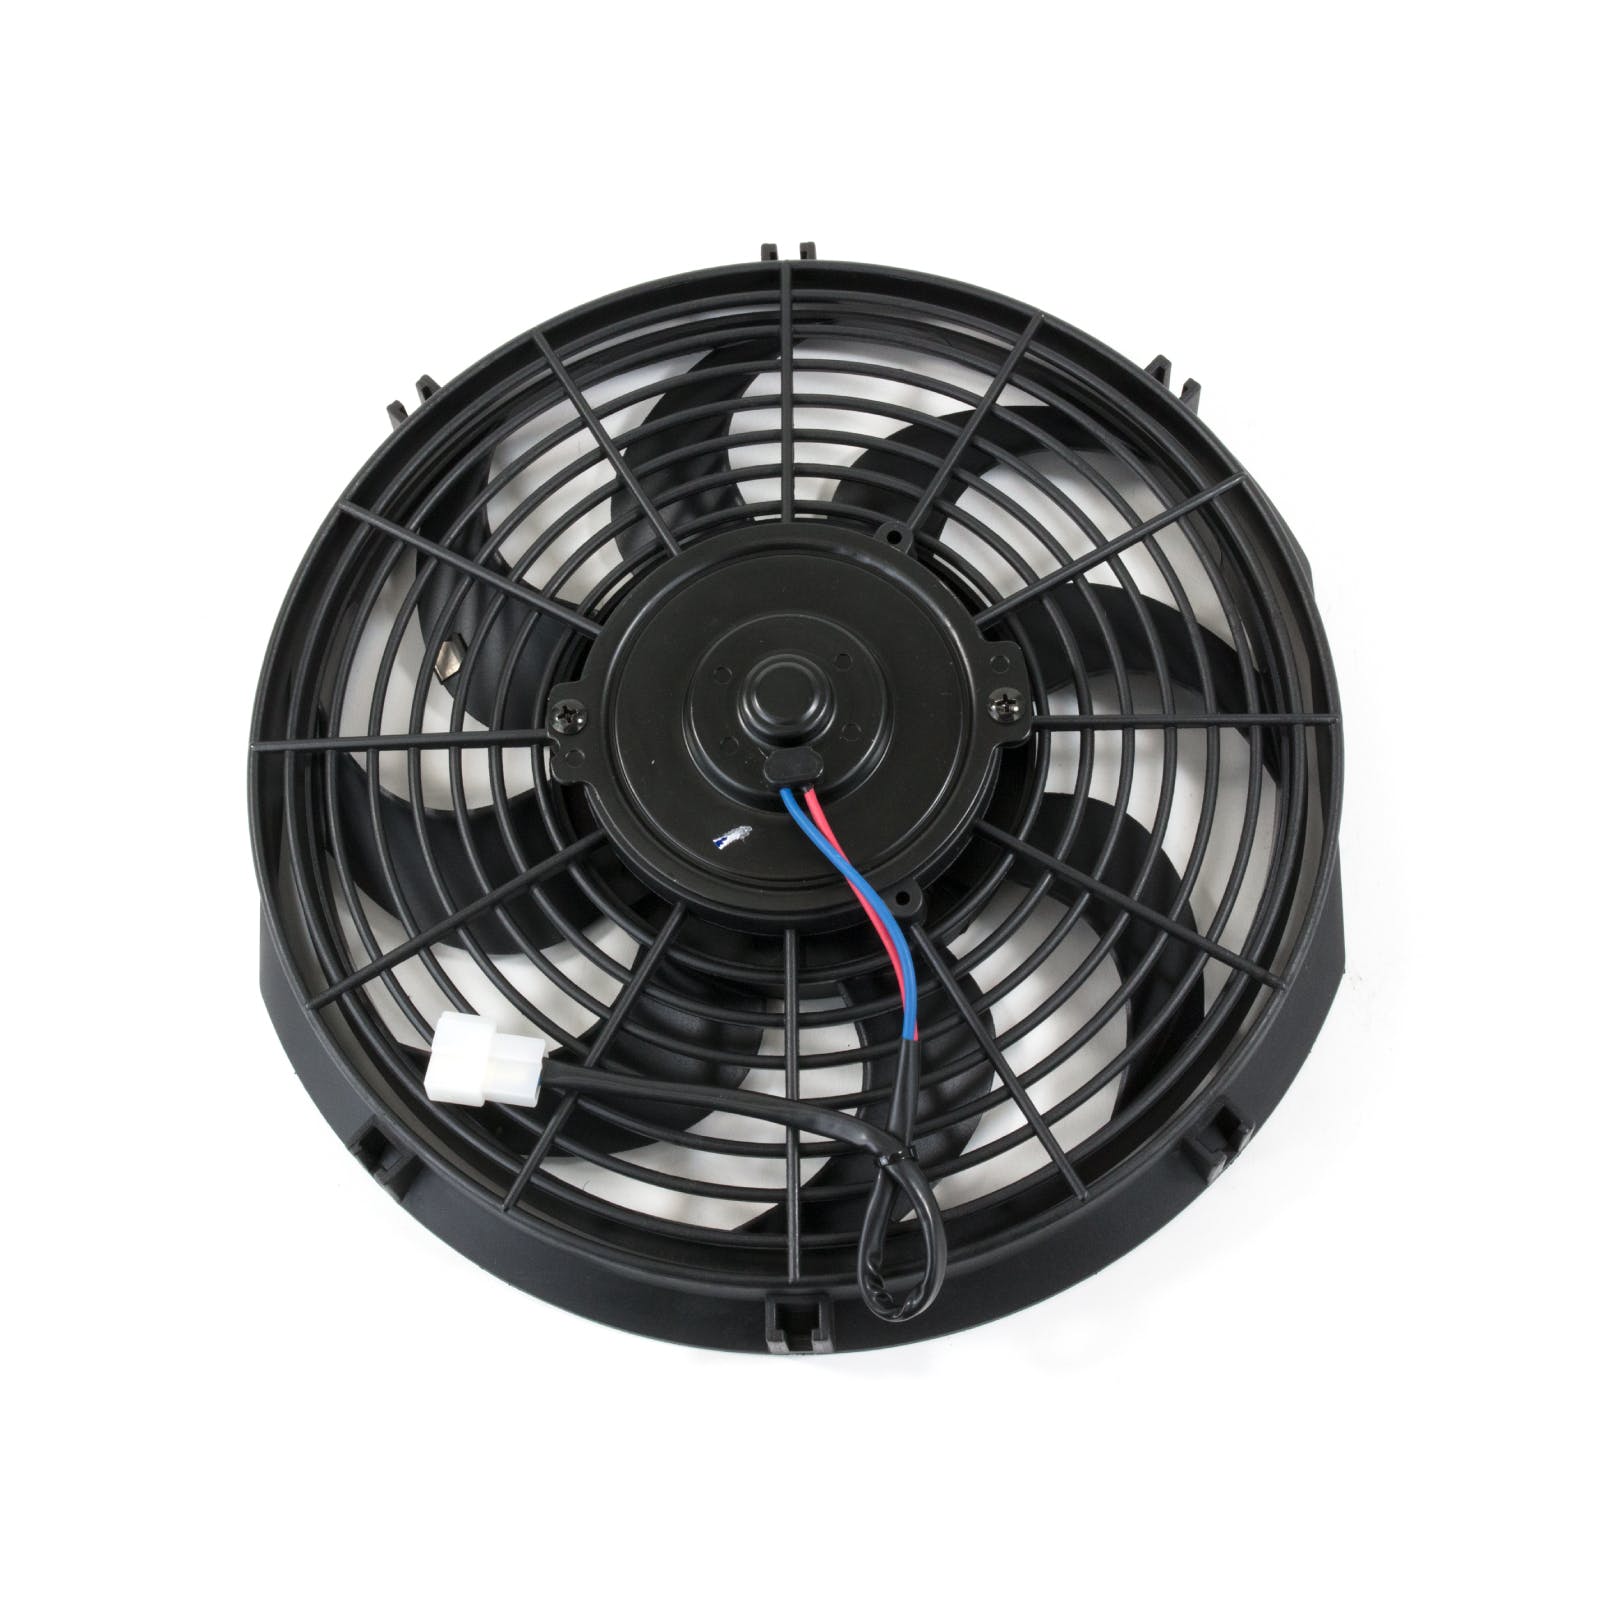 Top Street Performance HC7103 12 inch Pro Series Universal Electric Cooling Fan, S-Blade